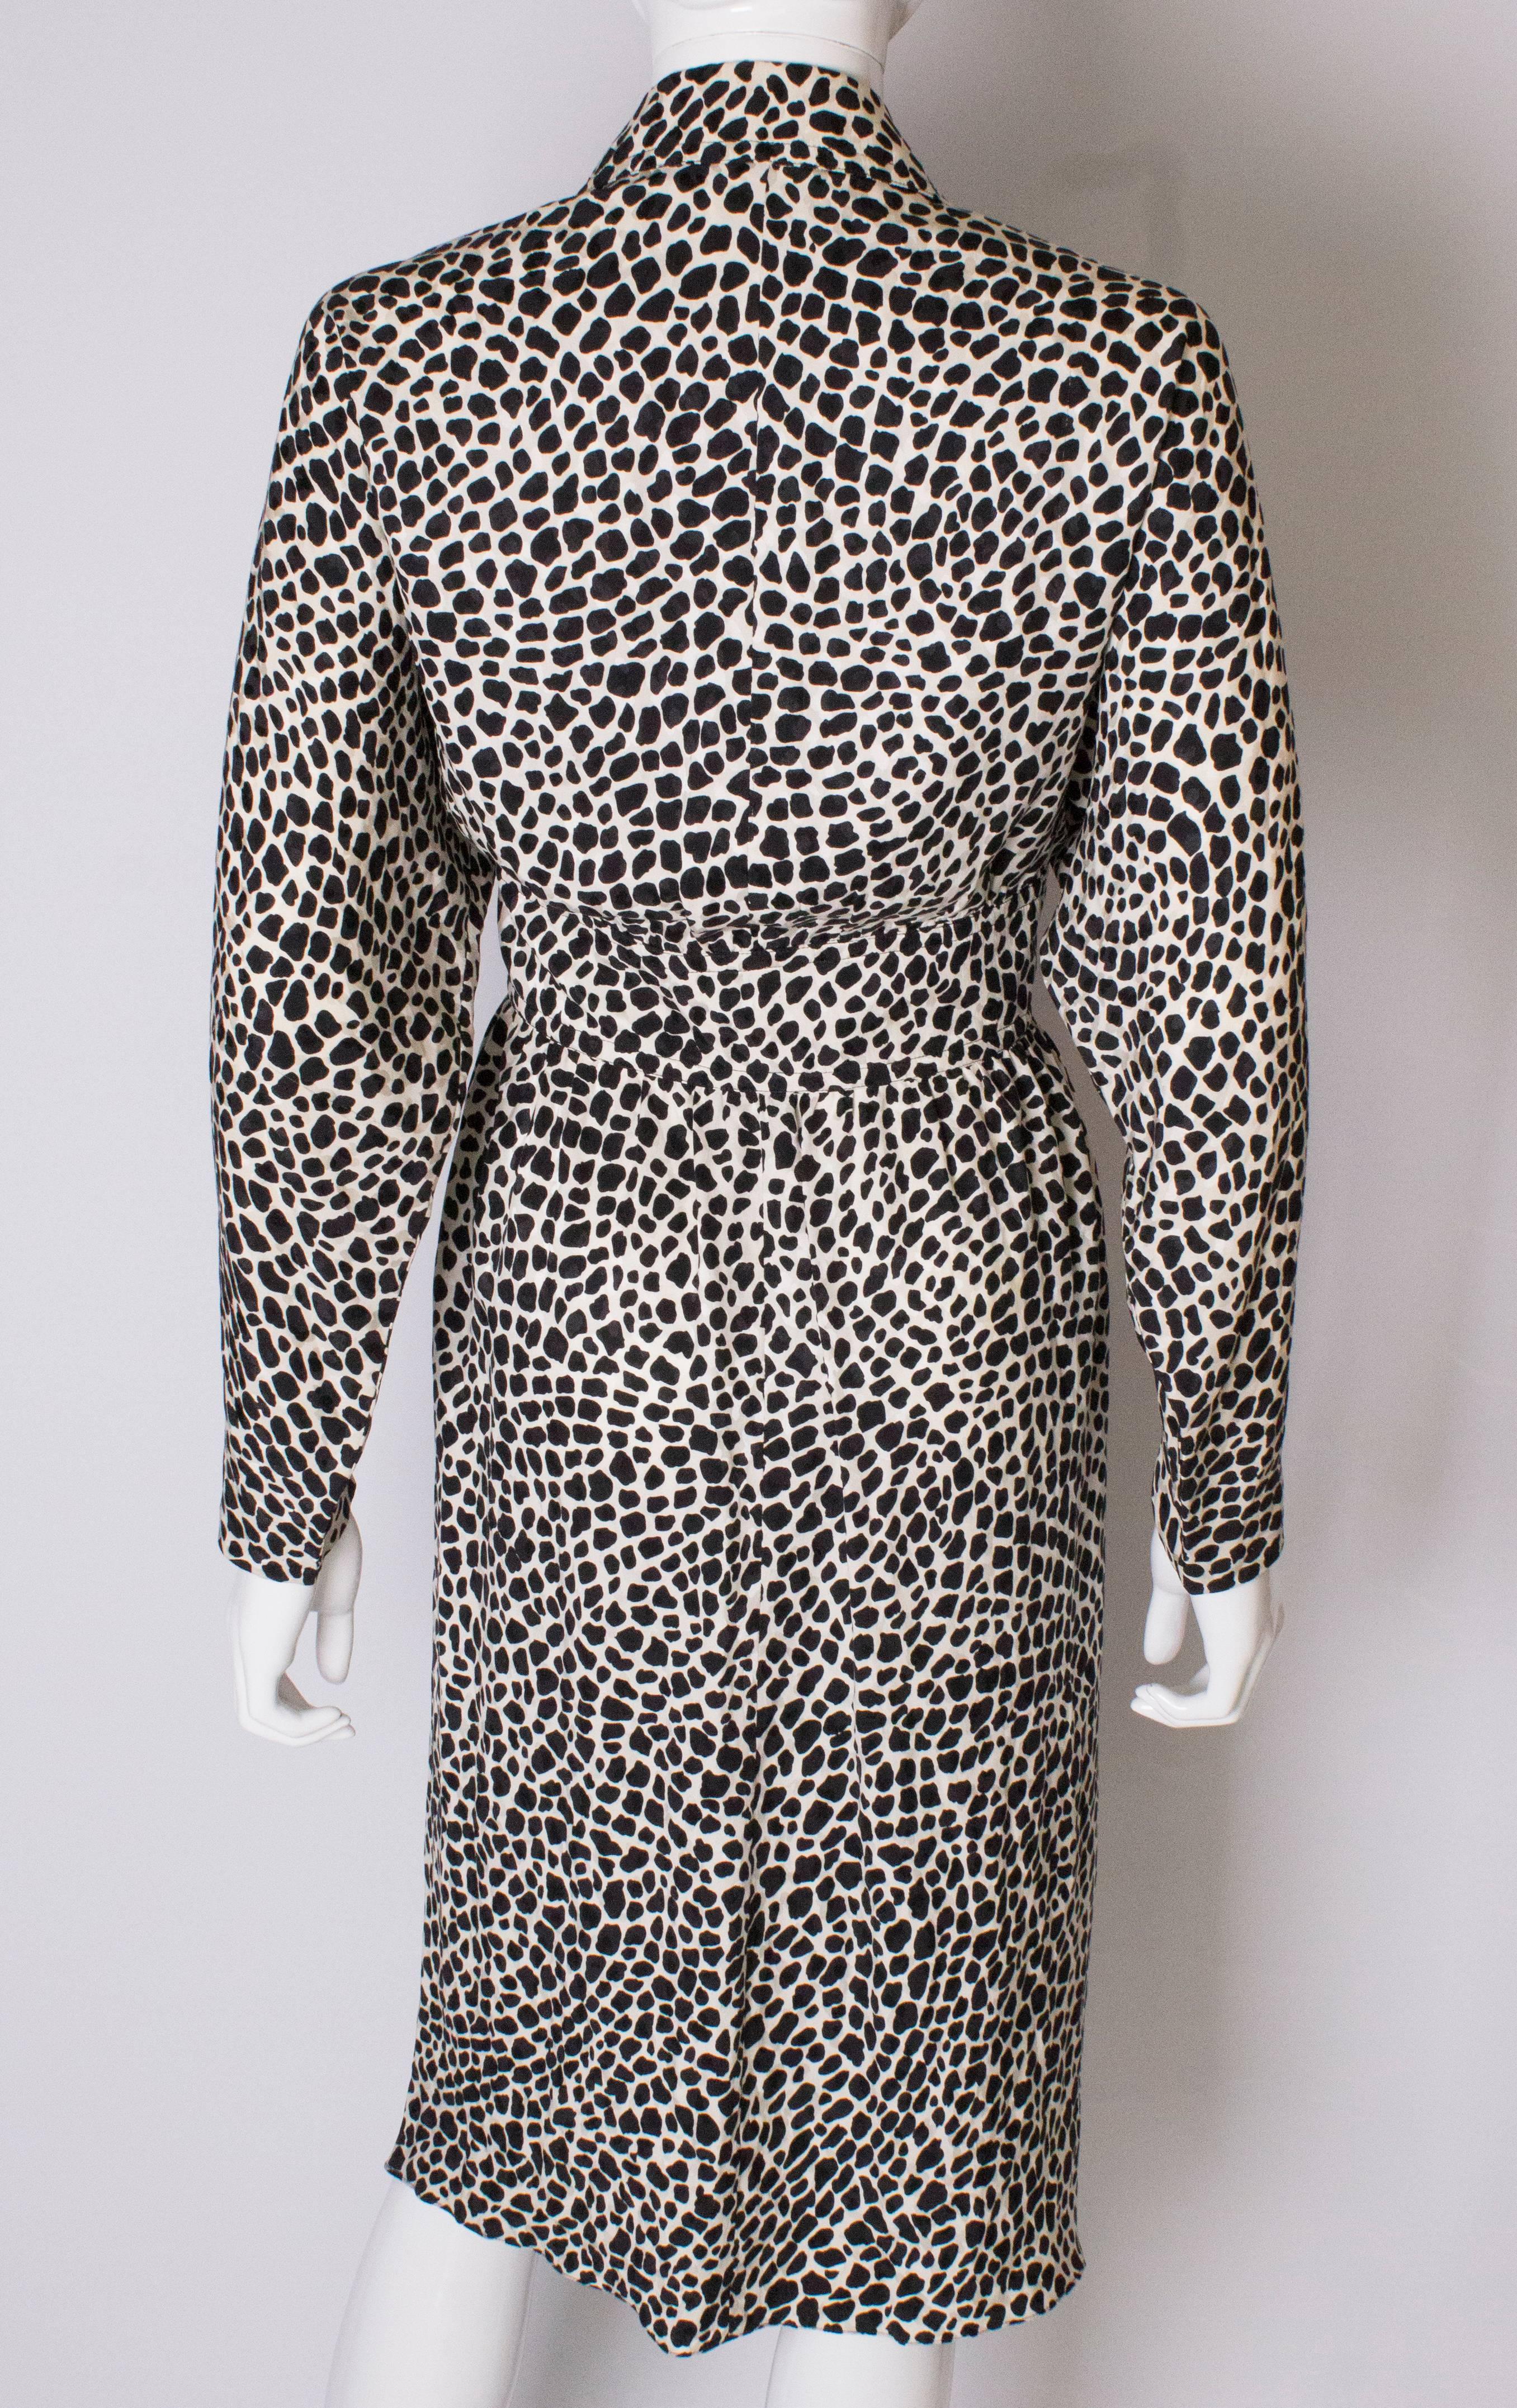 A Vintage 1980s Black and White printed Dress with bow detail by Adele Simpson 4